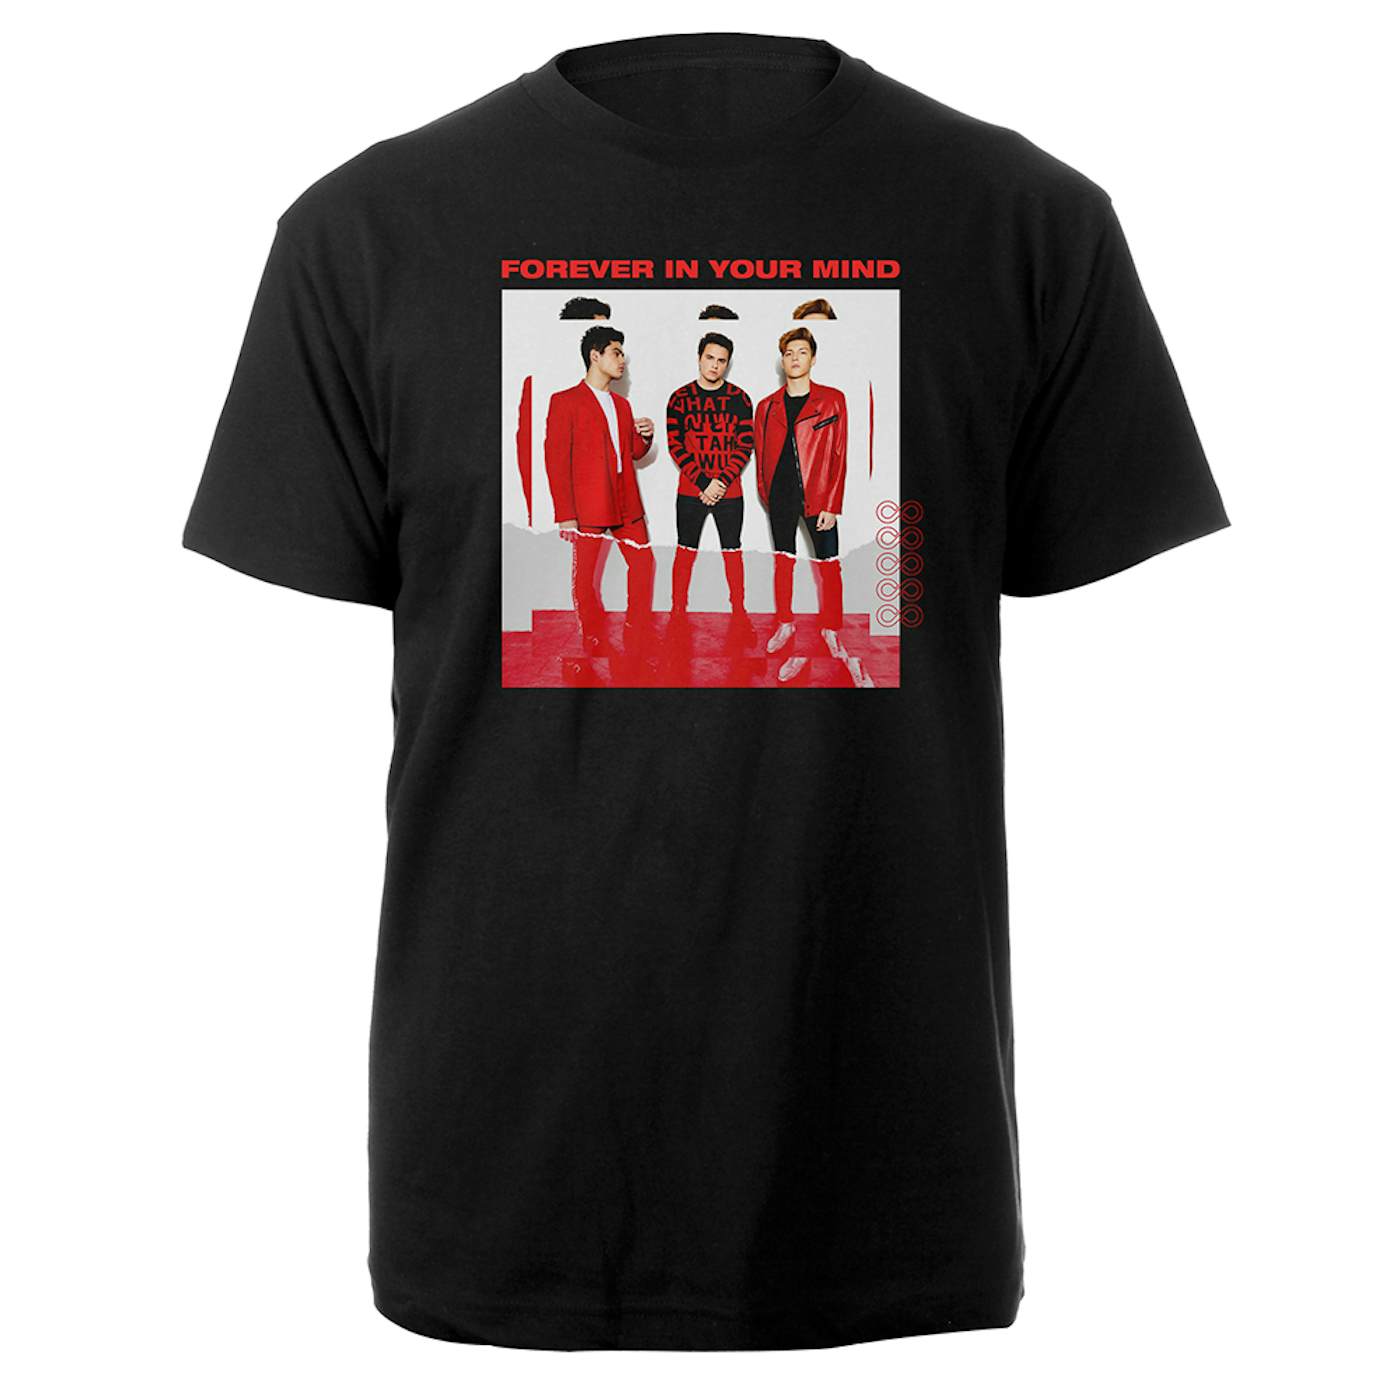 Forever In Your Mind red photo tee